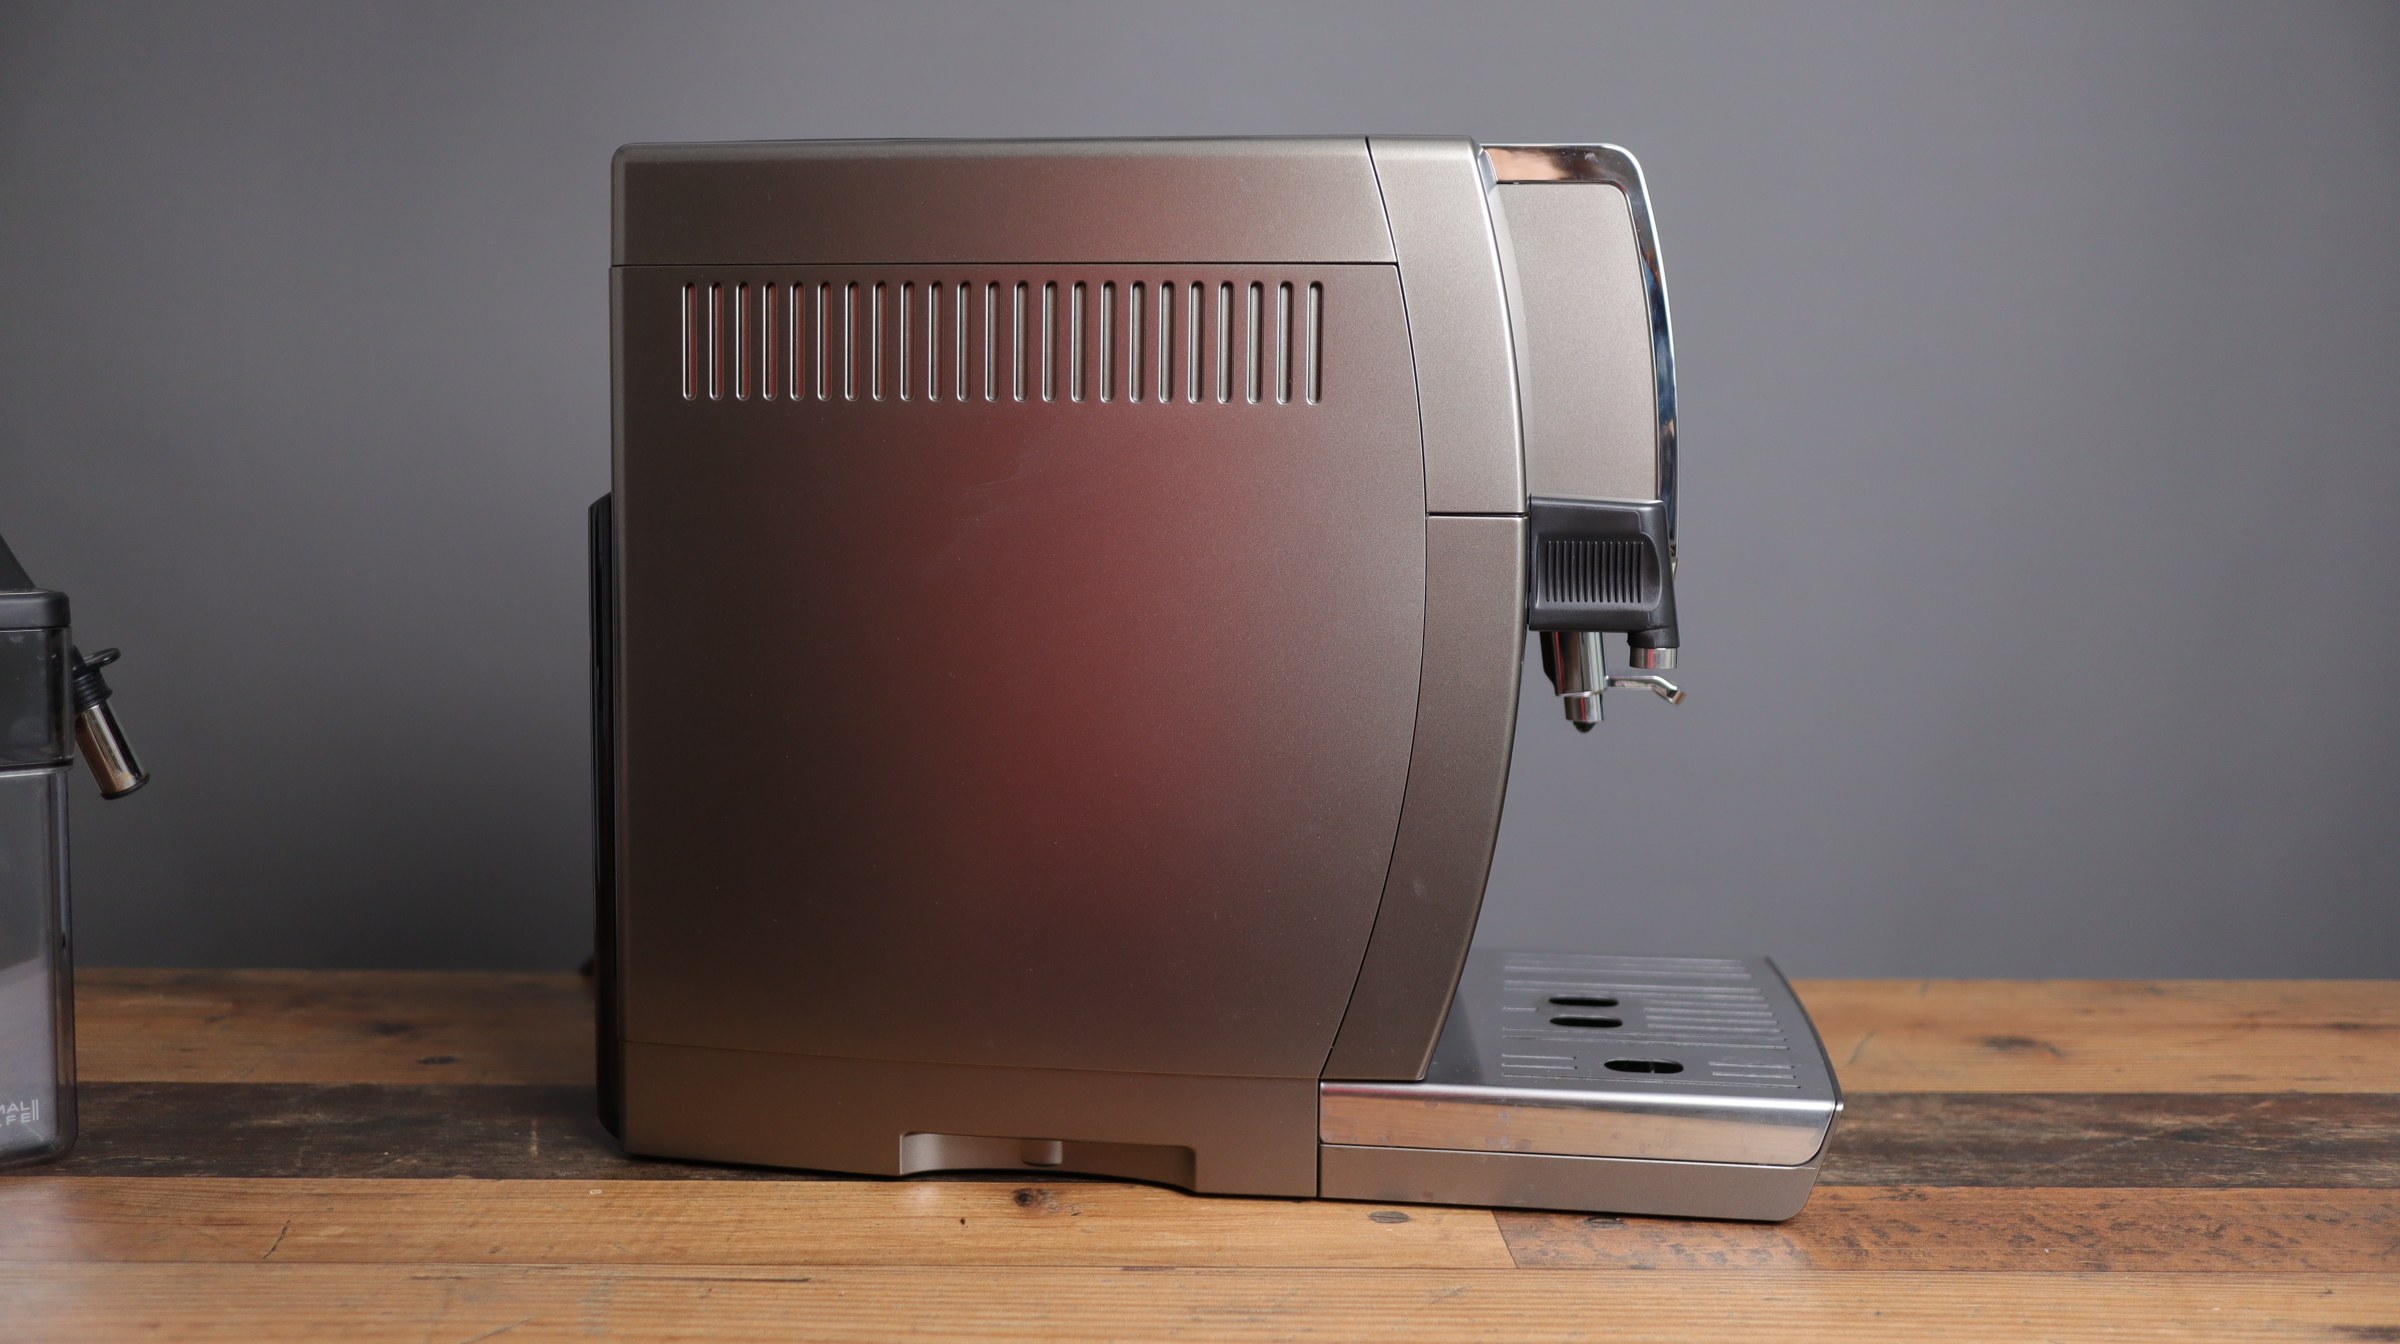 Delonghi Dinamica Plus shown from the left side.